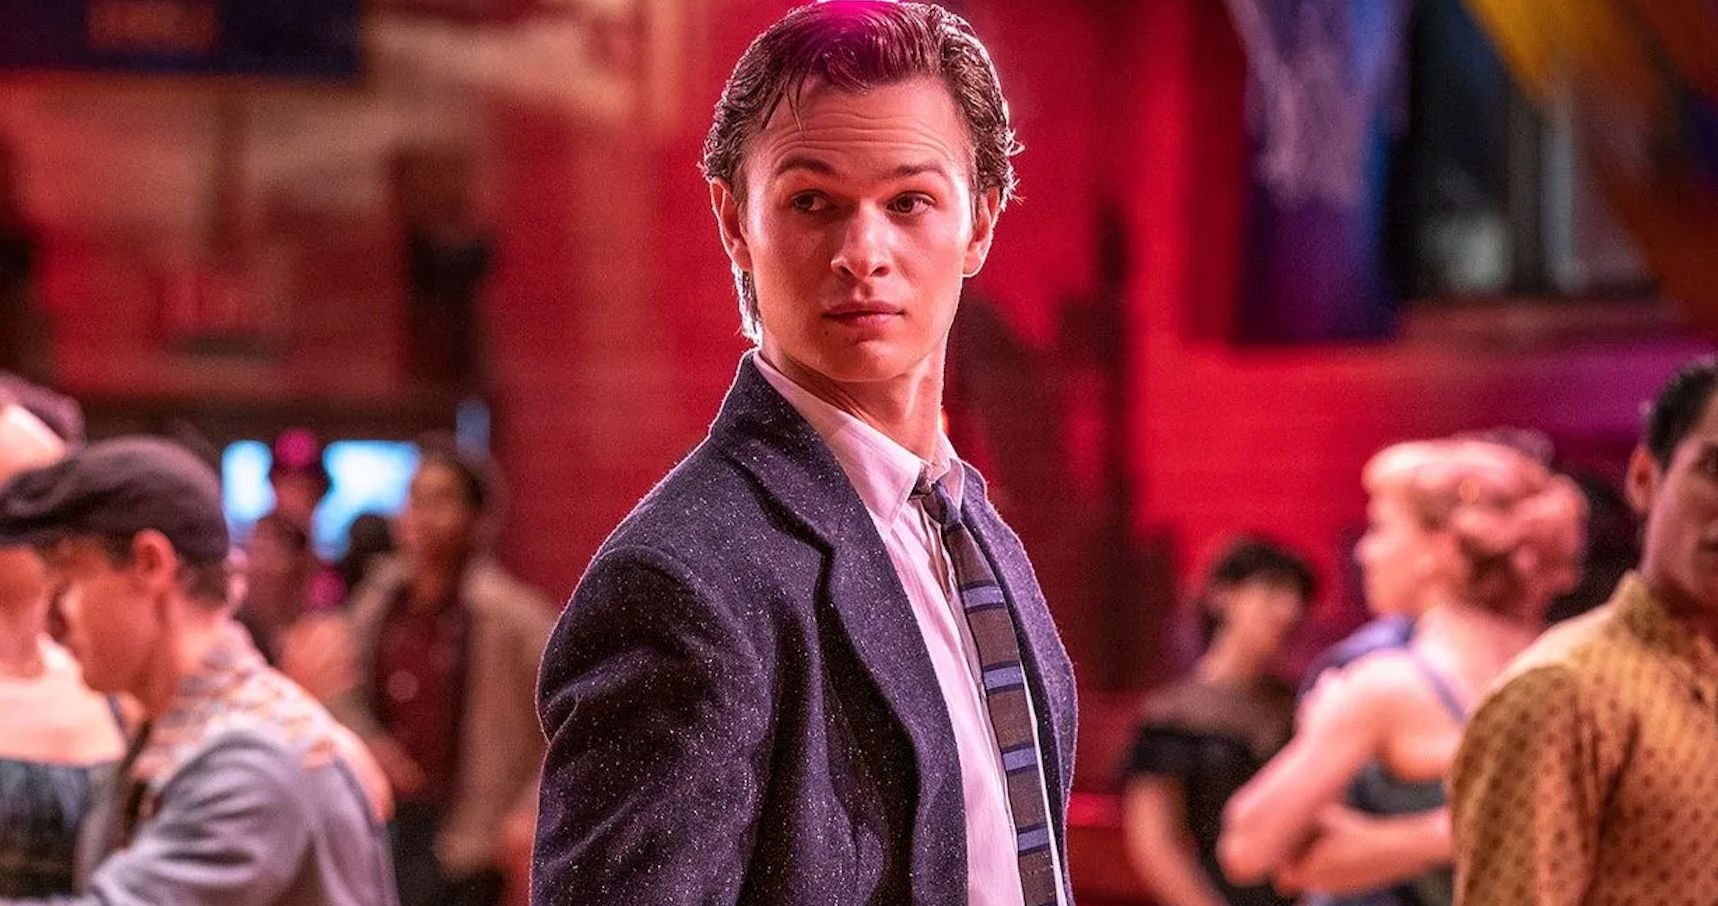 Ansel Elgort Makes His First Public Appearance in Over a Year, But It Wasn't for West Side Story